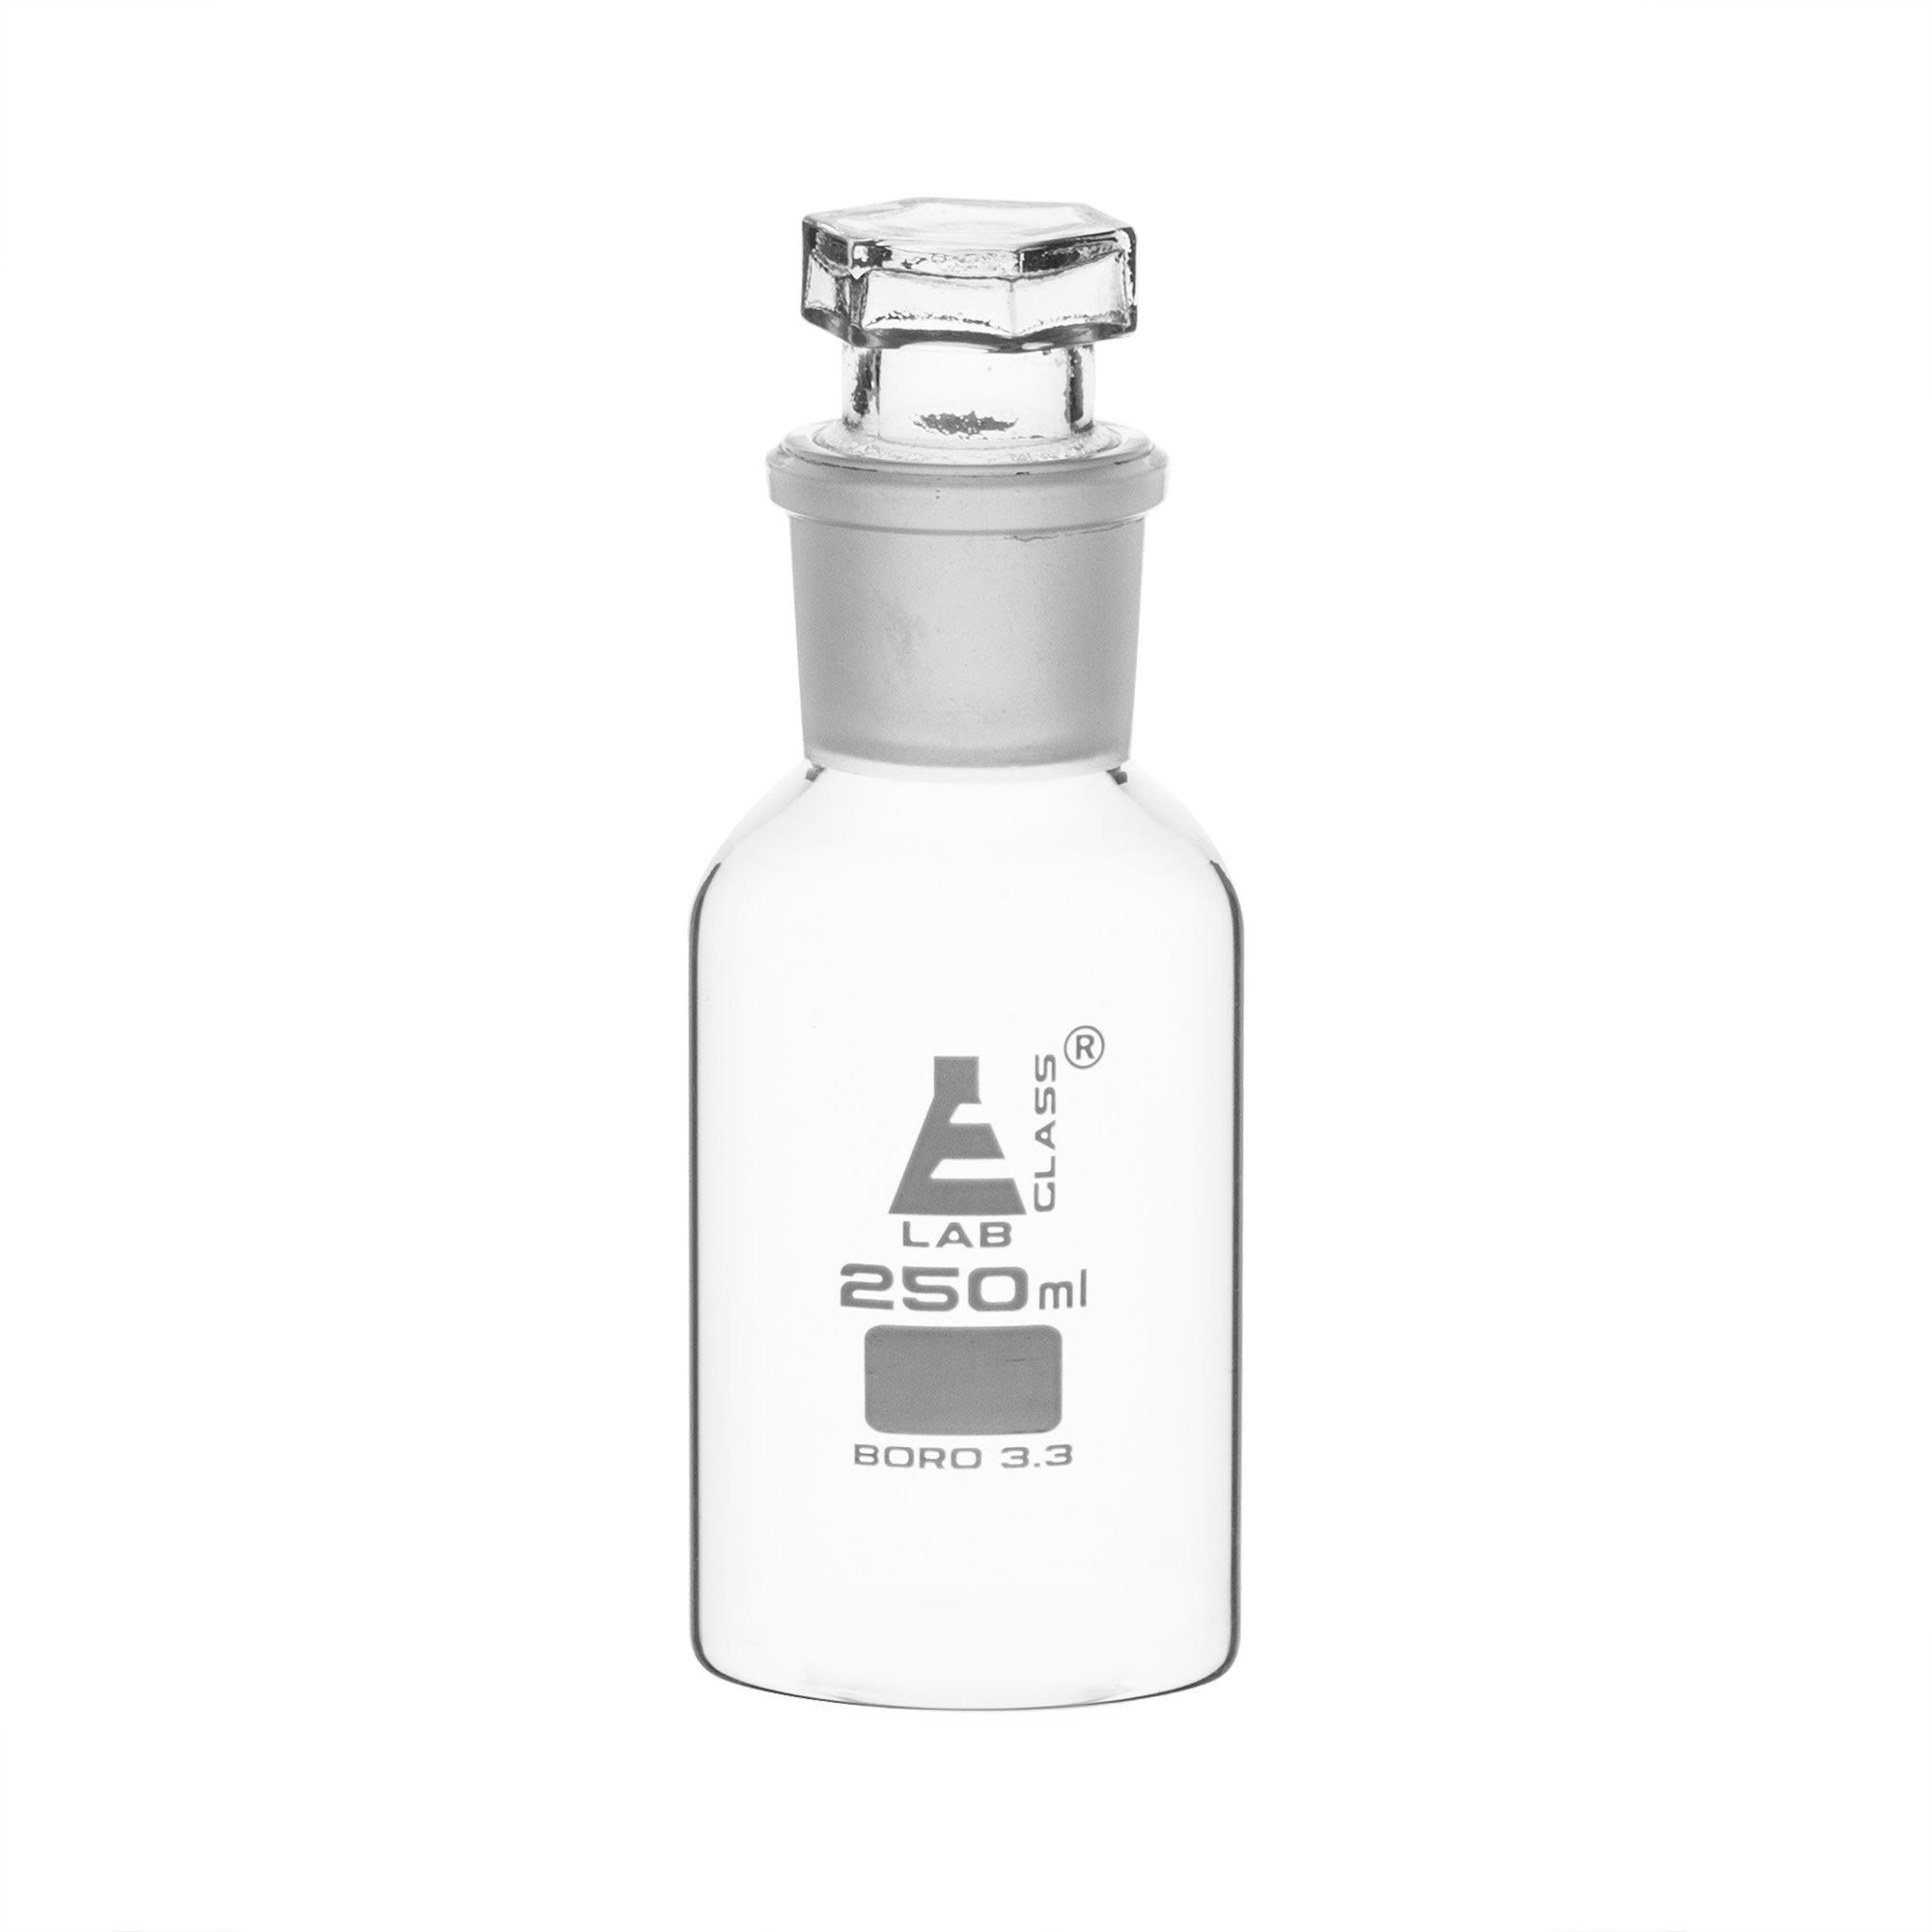 Clear Borosilicate Glass Reagent Bottle with Hollow Glass Stopper, 250 ml, Wide Mouth, Autoclavable